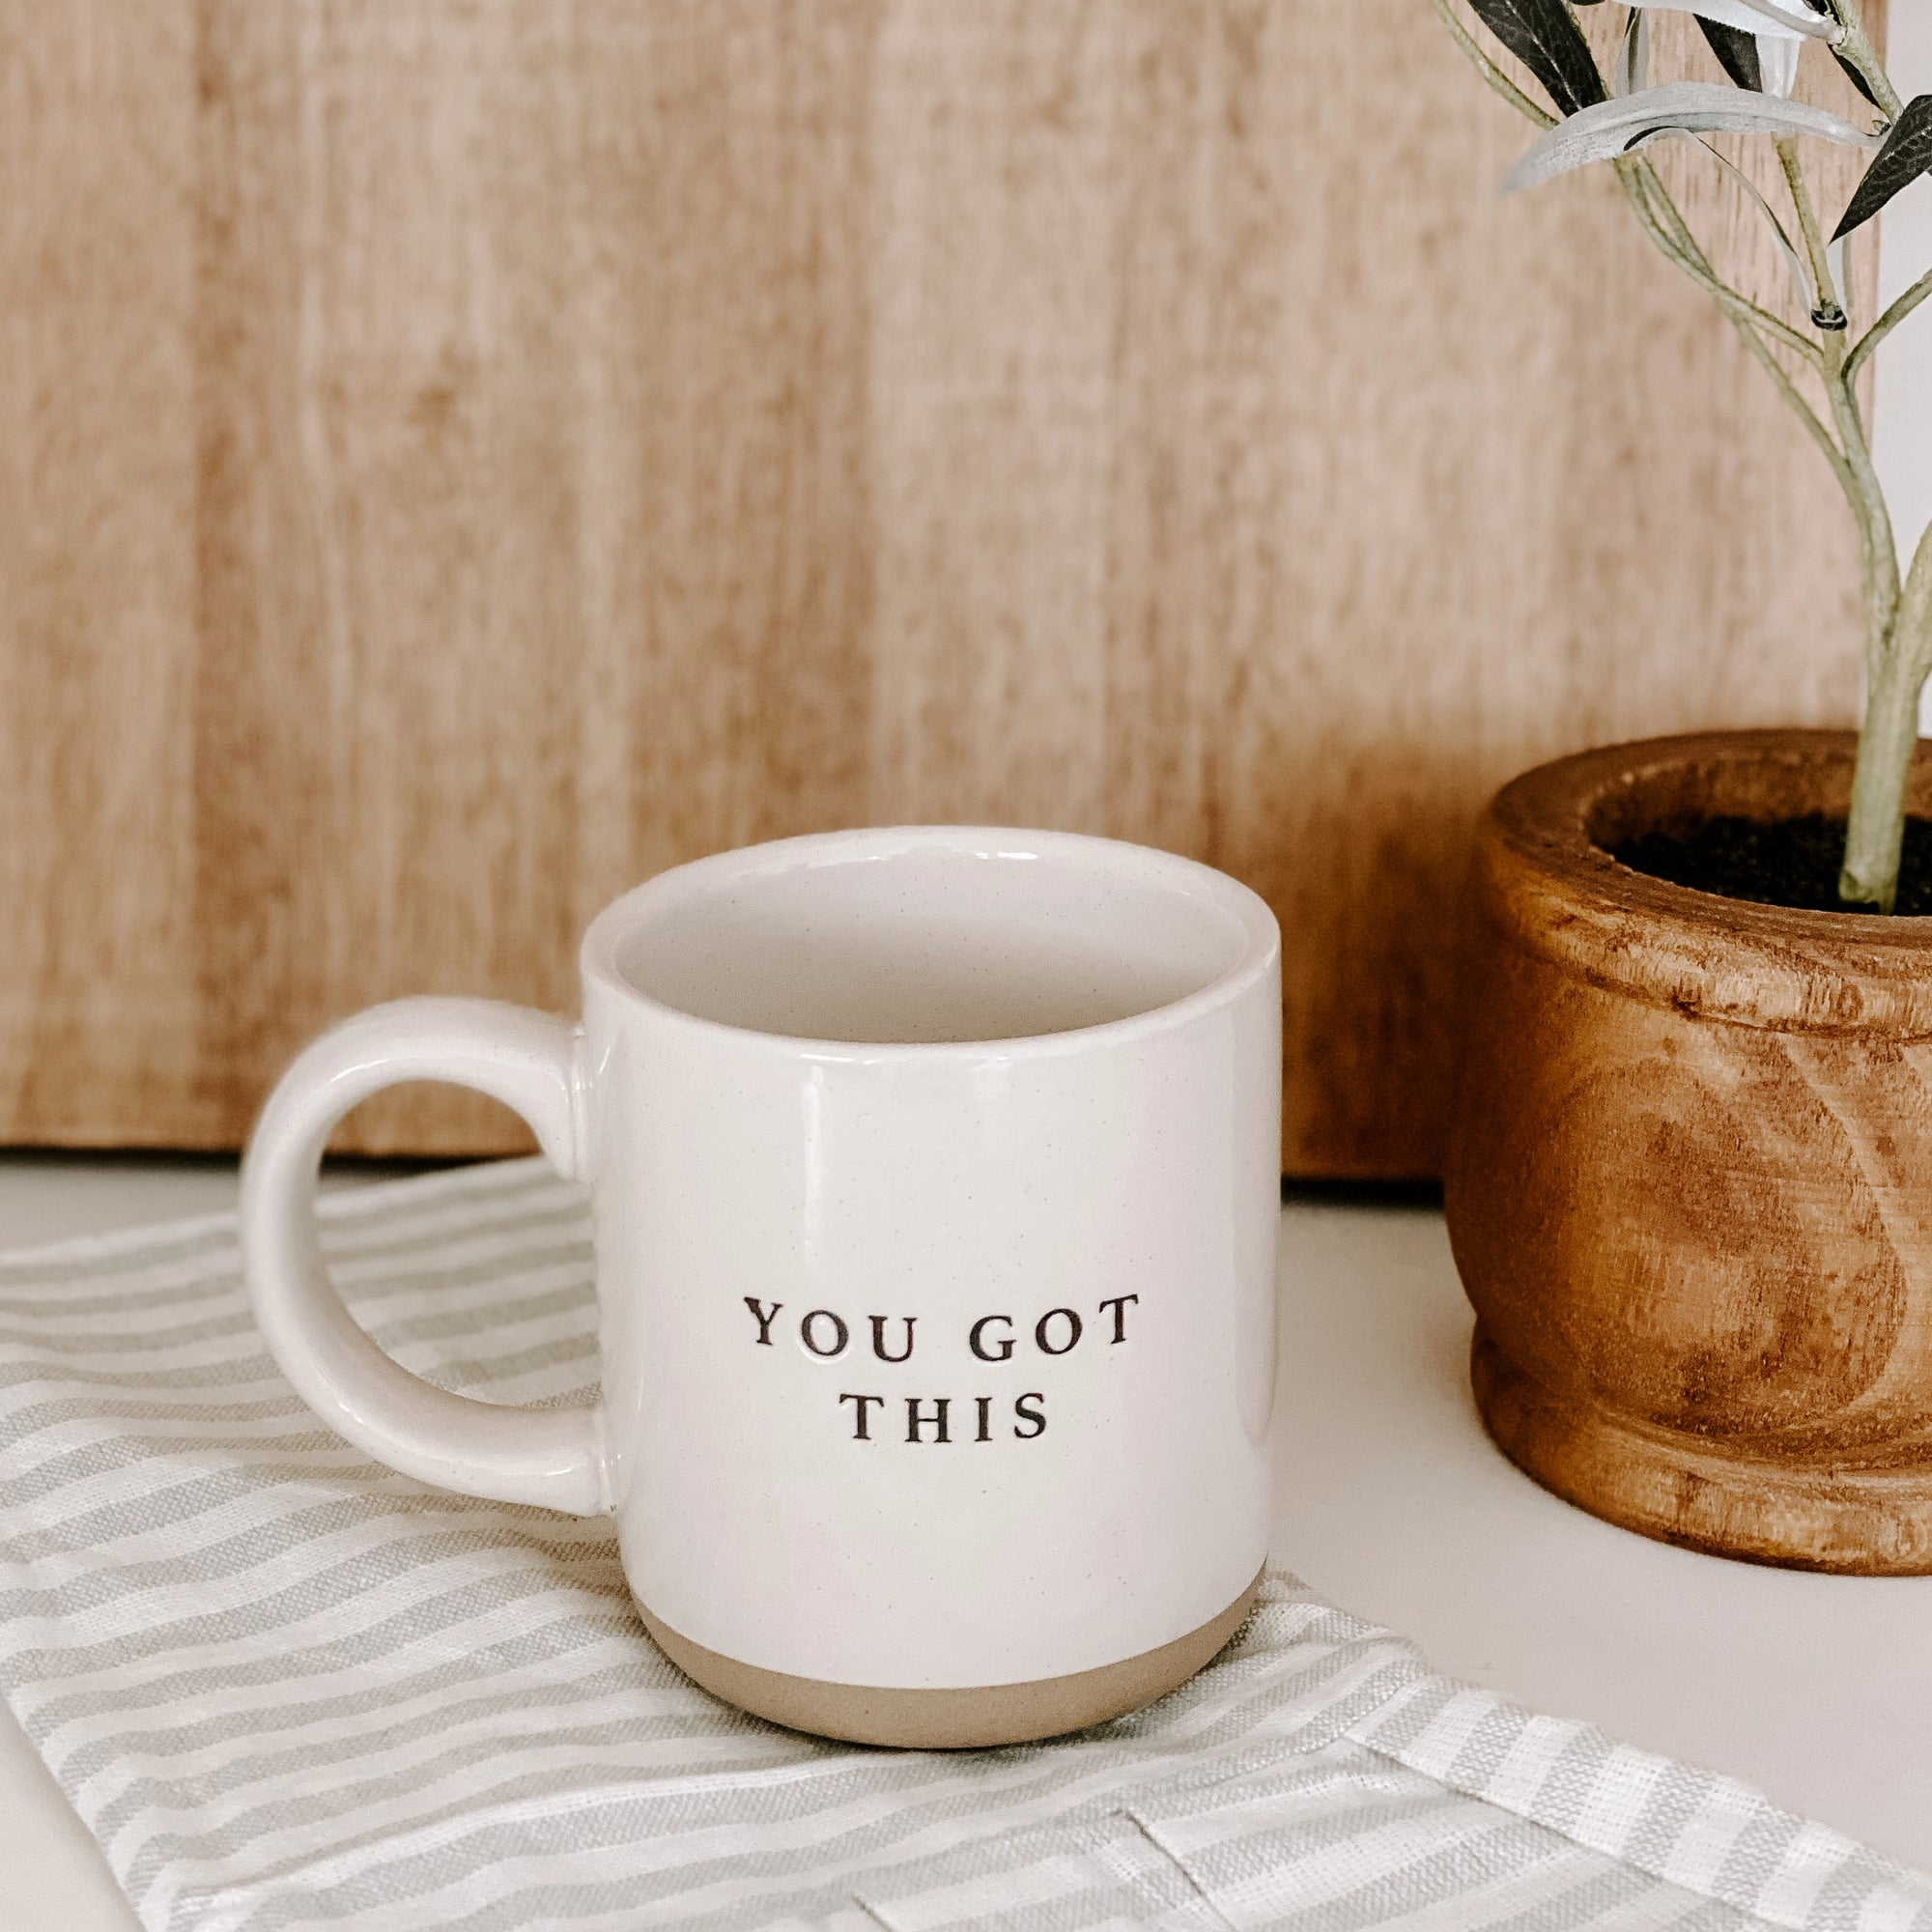 Cream and brown stoneware mug with black 'you got this' text embossed on a striped tea towel in front of plant.